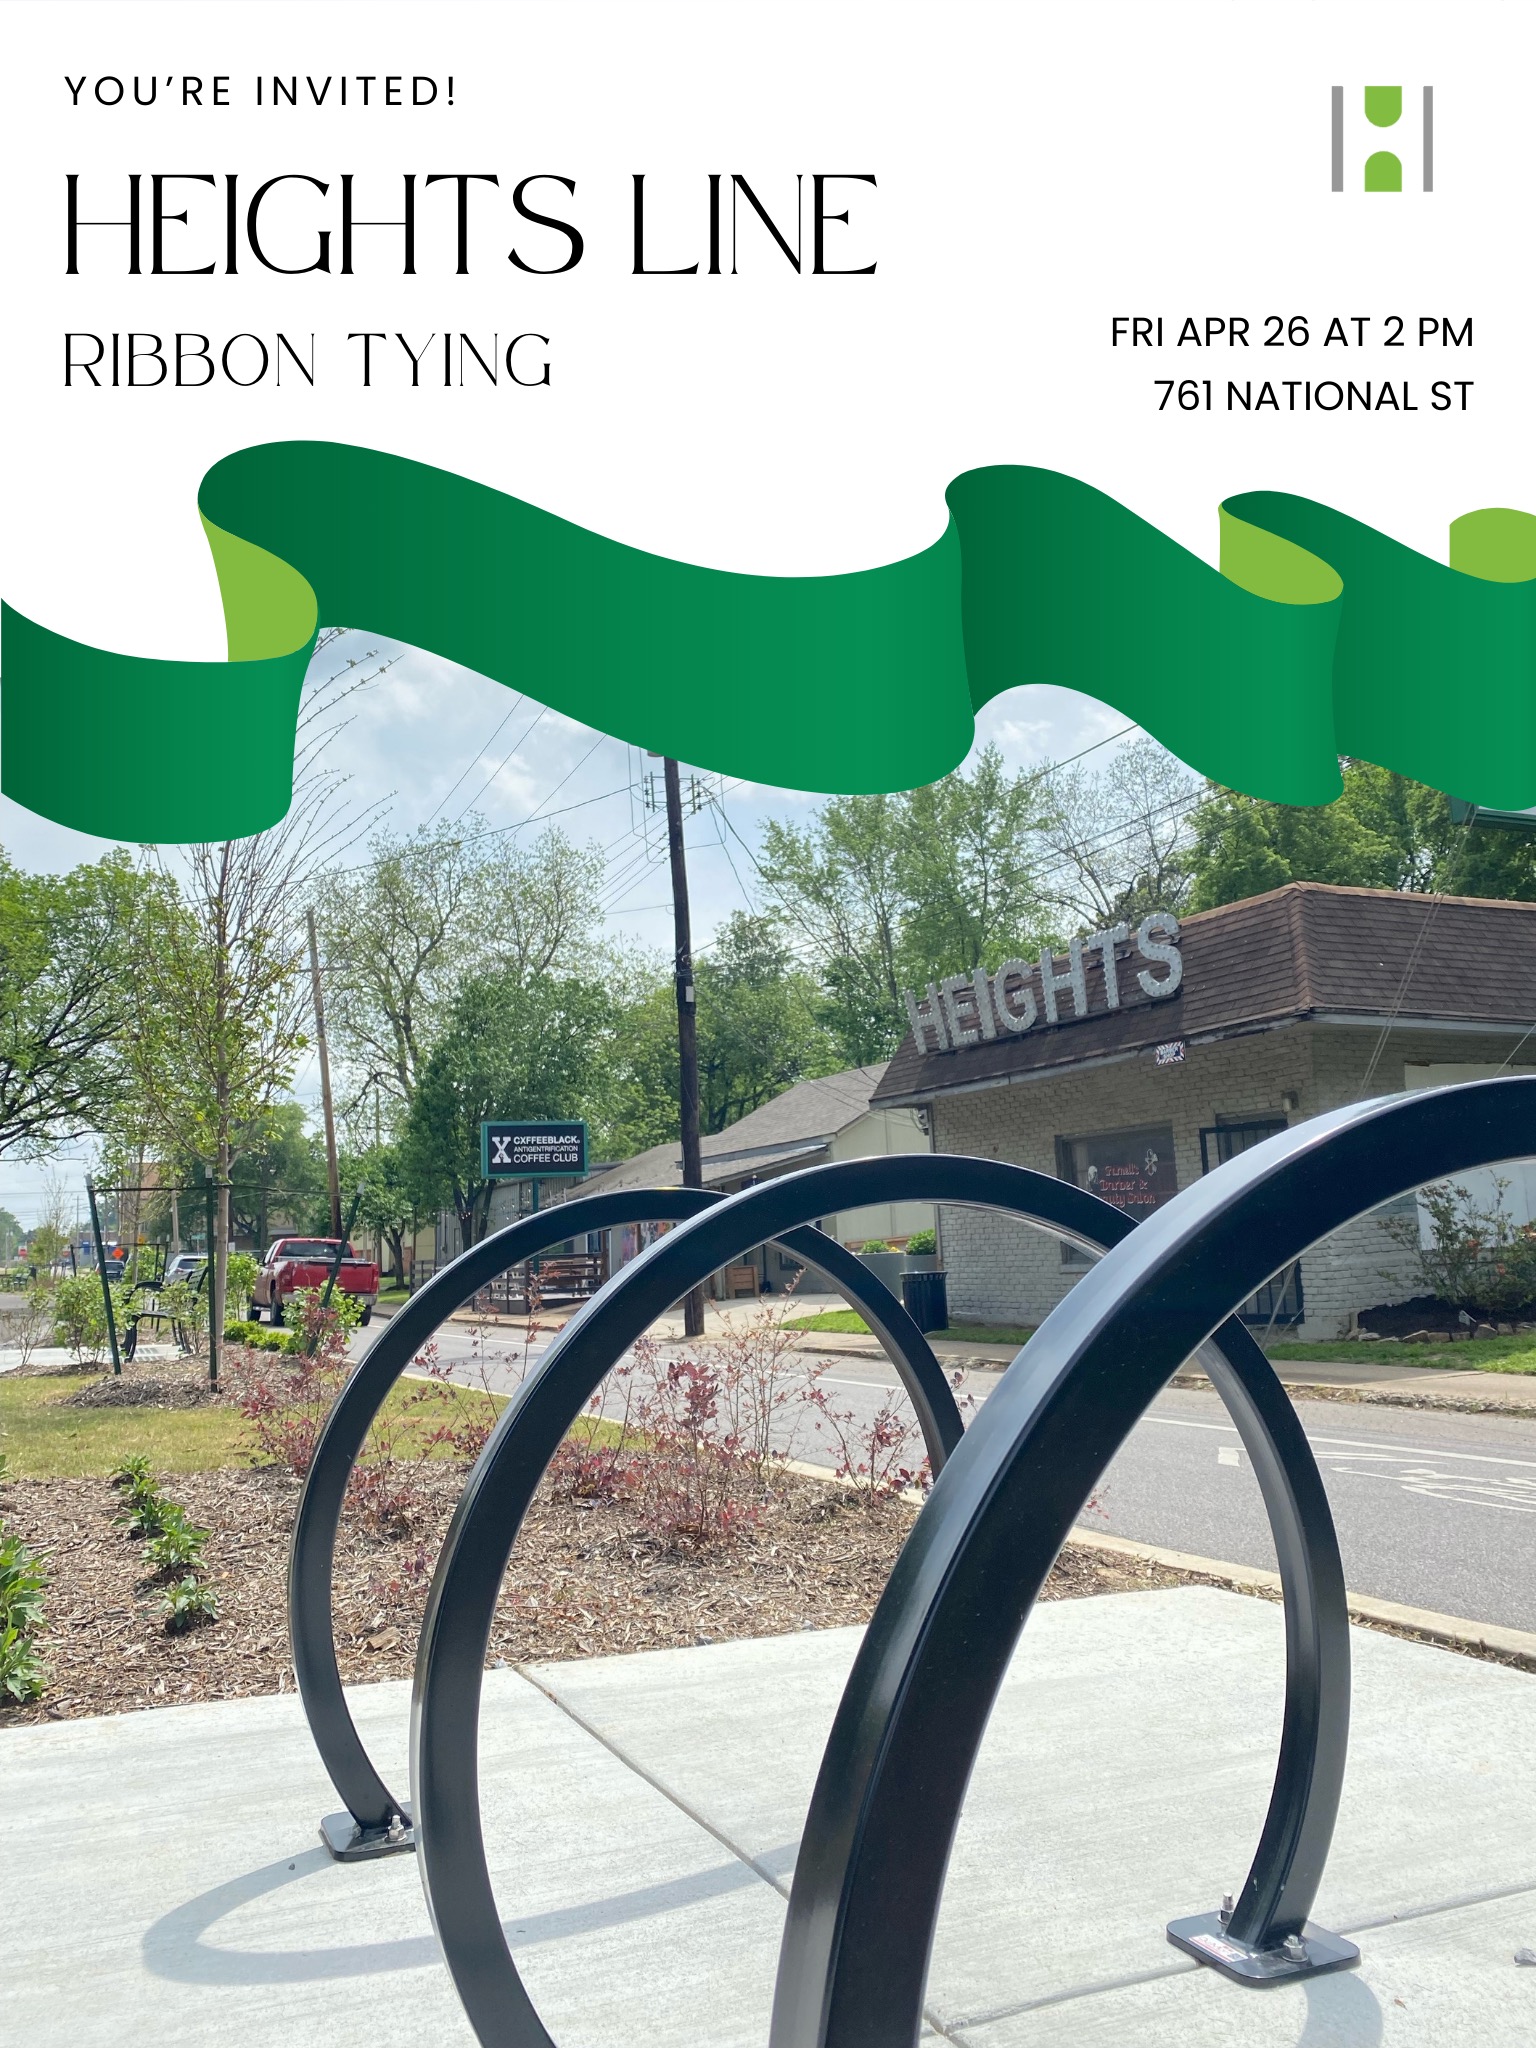 Invitation flyer for the Heights Line ribbon-tying ceremony on April 26 at 2 pm, featuring a view of the venue with distinctive curved bike racks in the foreground.